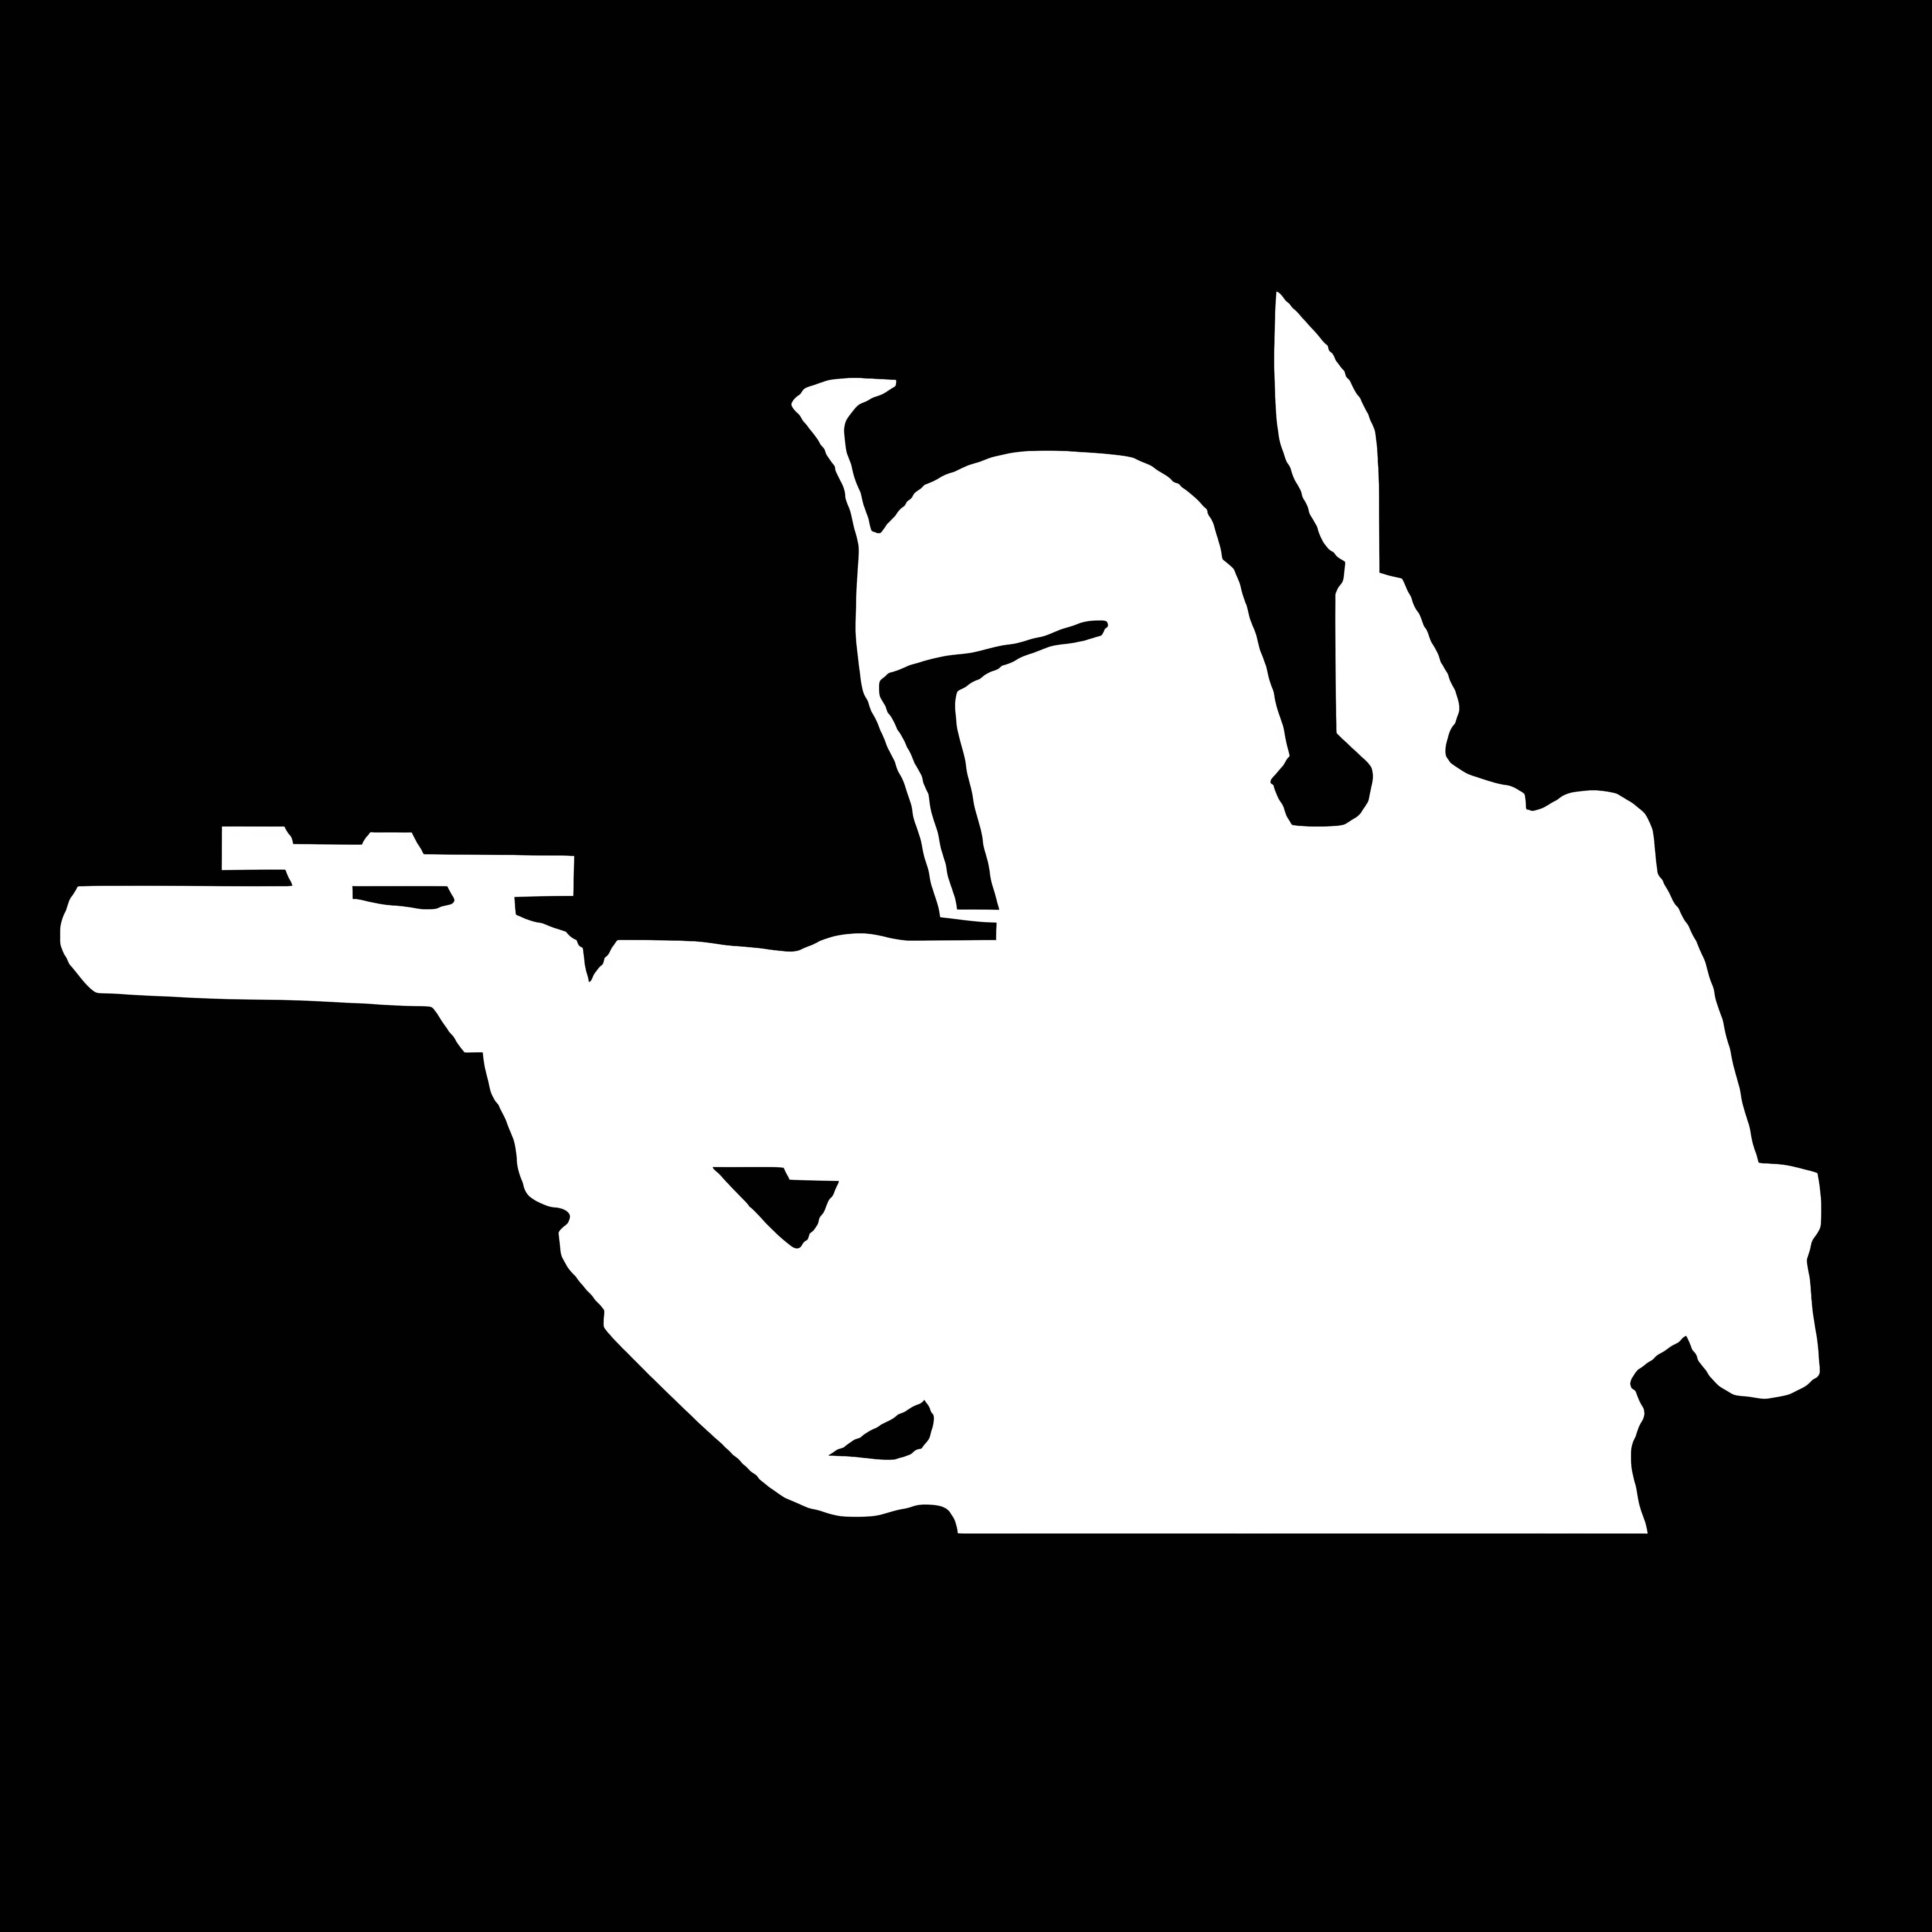 Star Wars Vinyl Decals 10 to Choose From Stickers for Laptop, Car Window,  and Bumper 